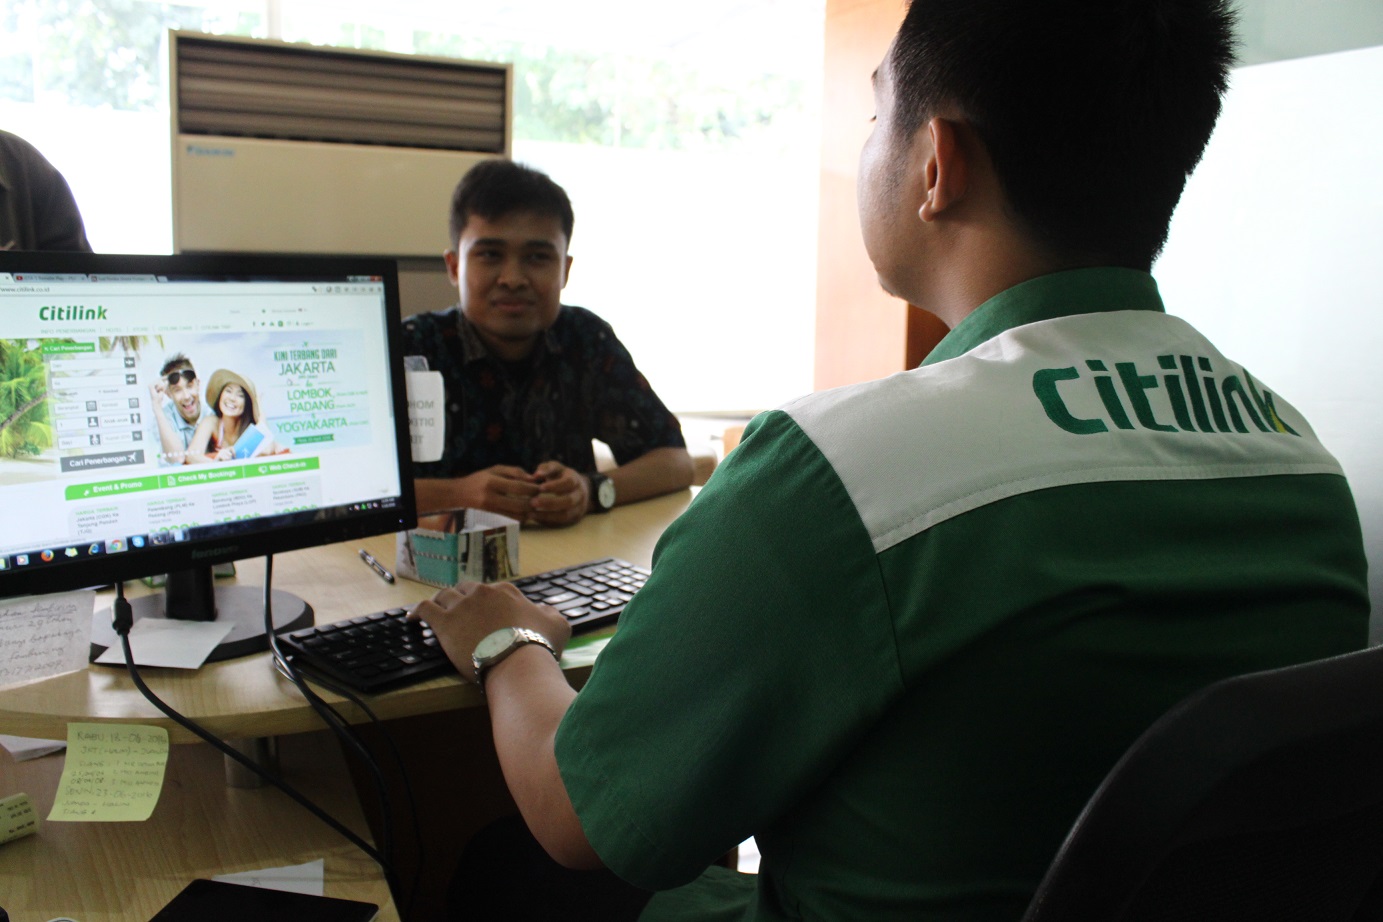 A ground staff servicing a customer at the Citilink check-in counter. Citilink ground staff now have access to data visualization tools to learn more about the customer.